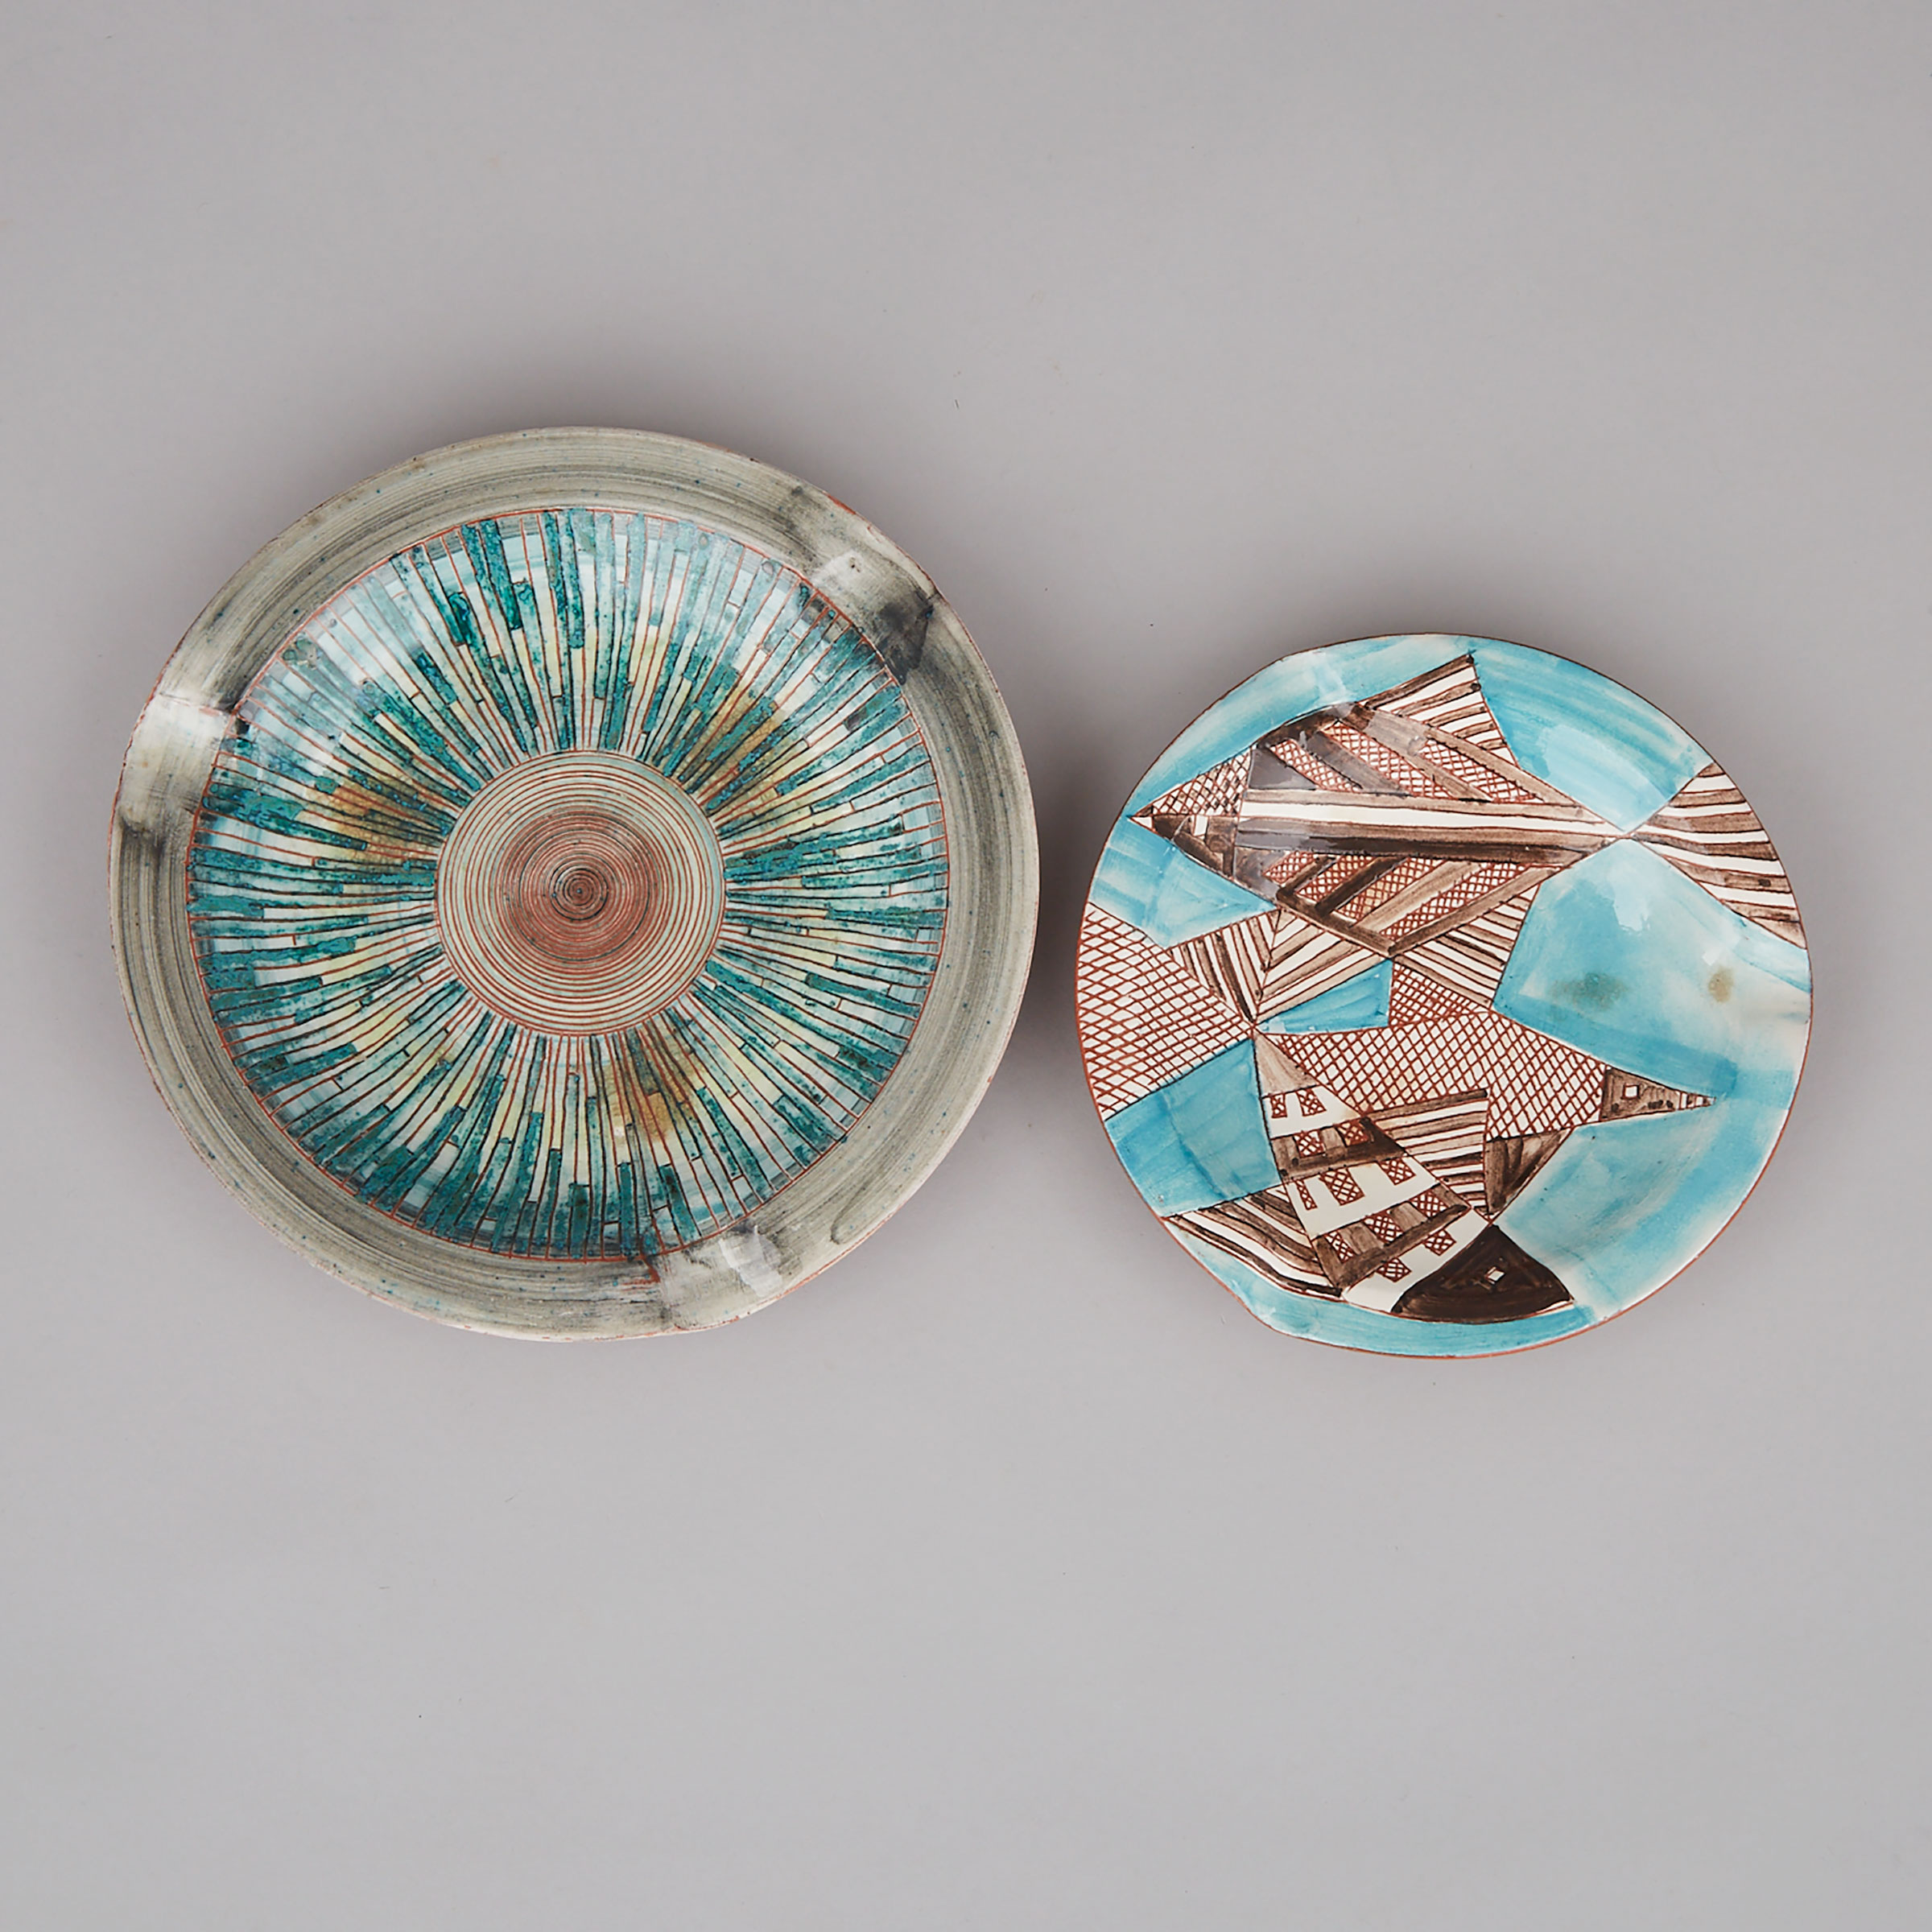 Two Brooklin Pottery Ashtrays, Theo and Susan Harlander, 1960s